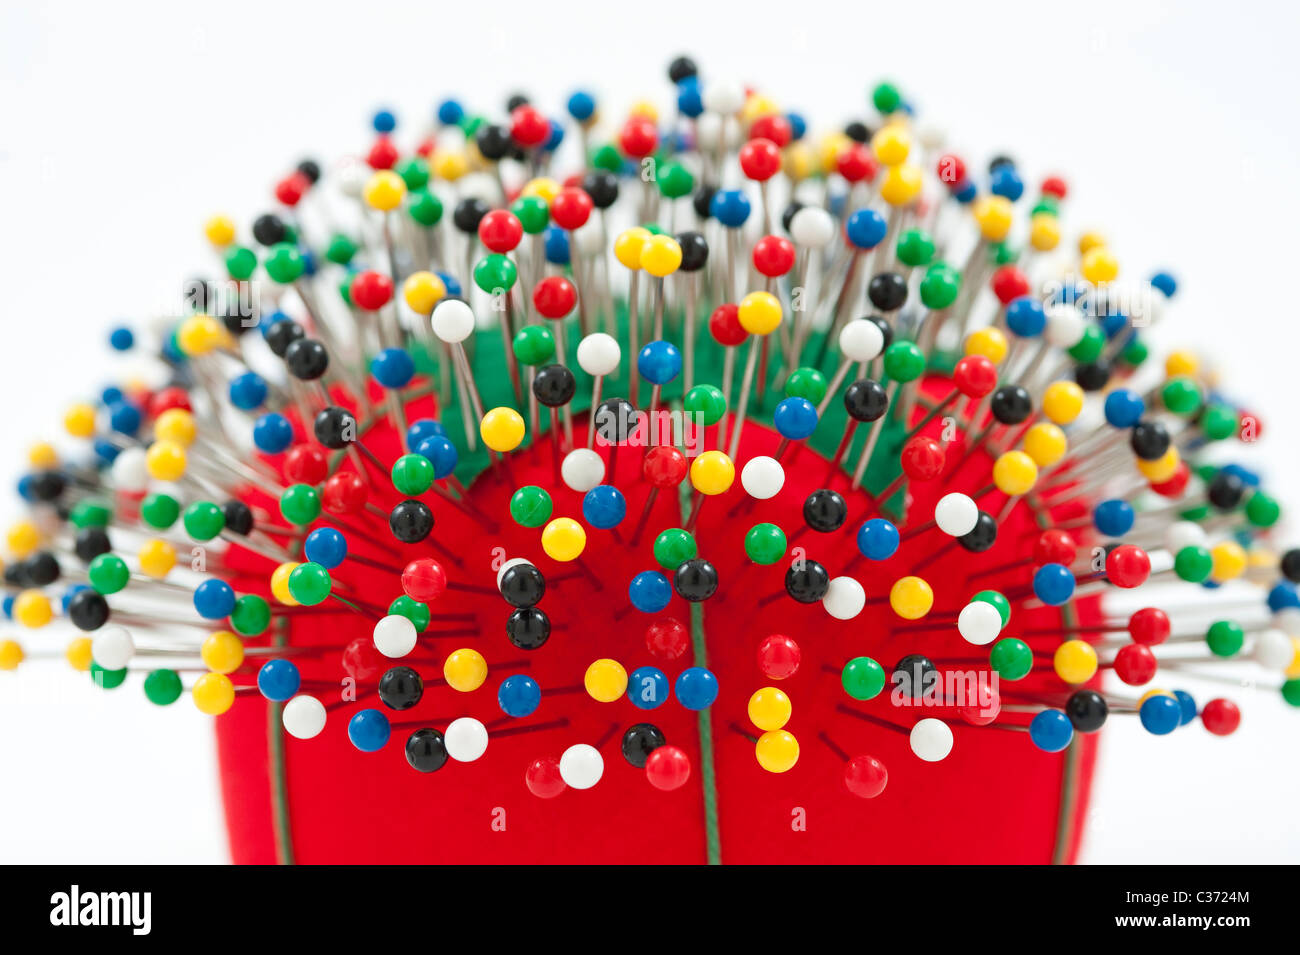 Sewing Pins And Pin Cushion Stock Photo, Picture and Royalty Free Image.  Image 26963484.